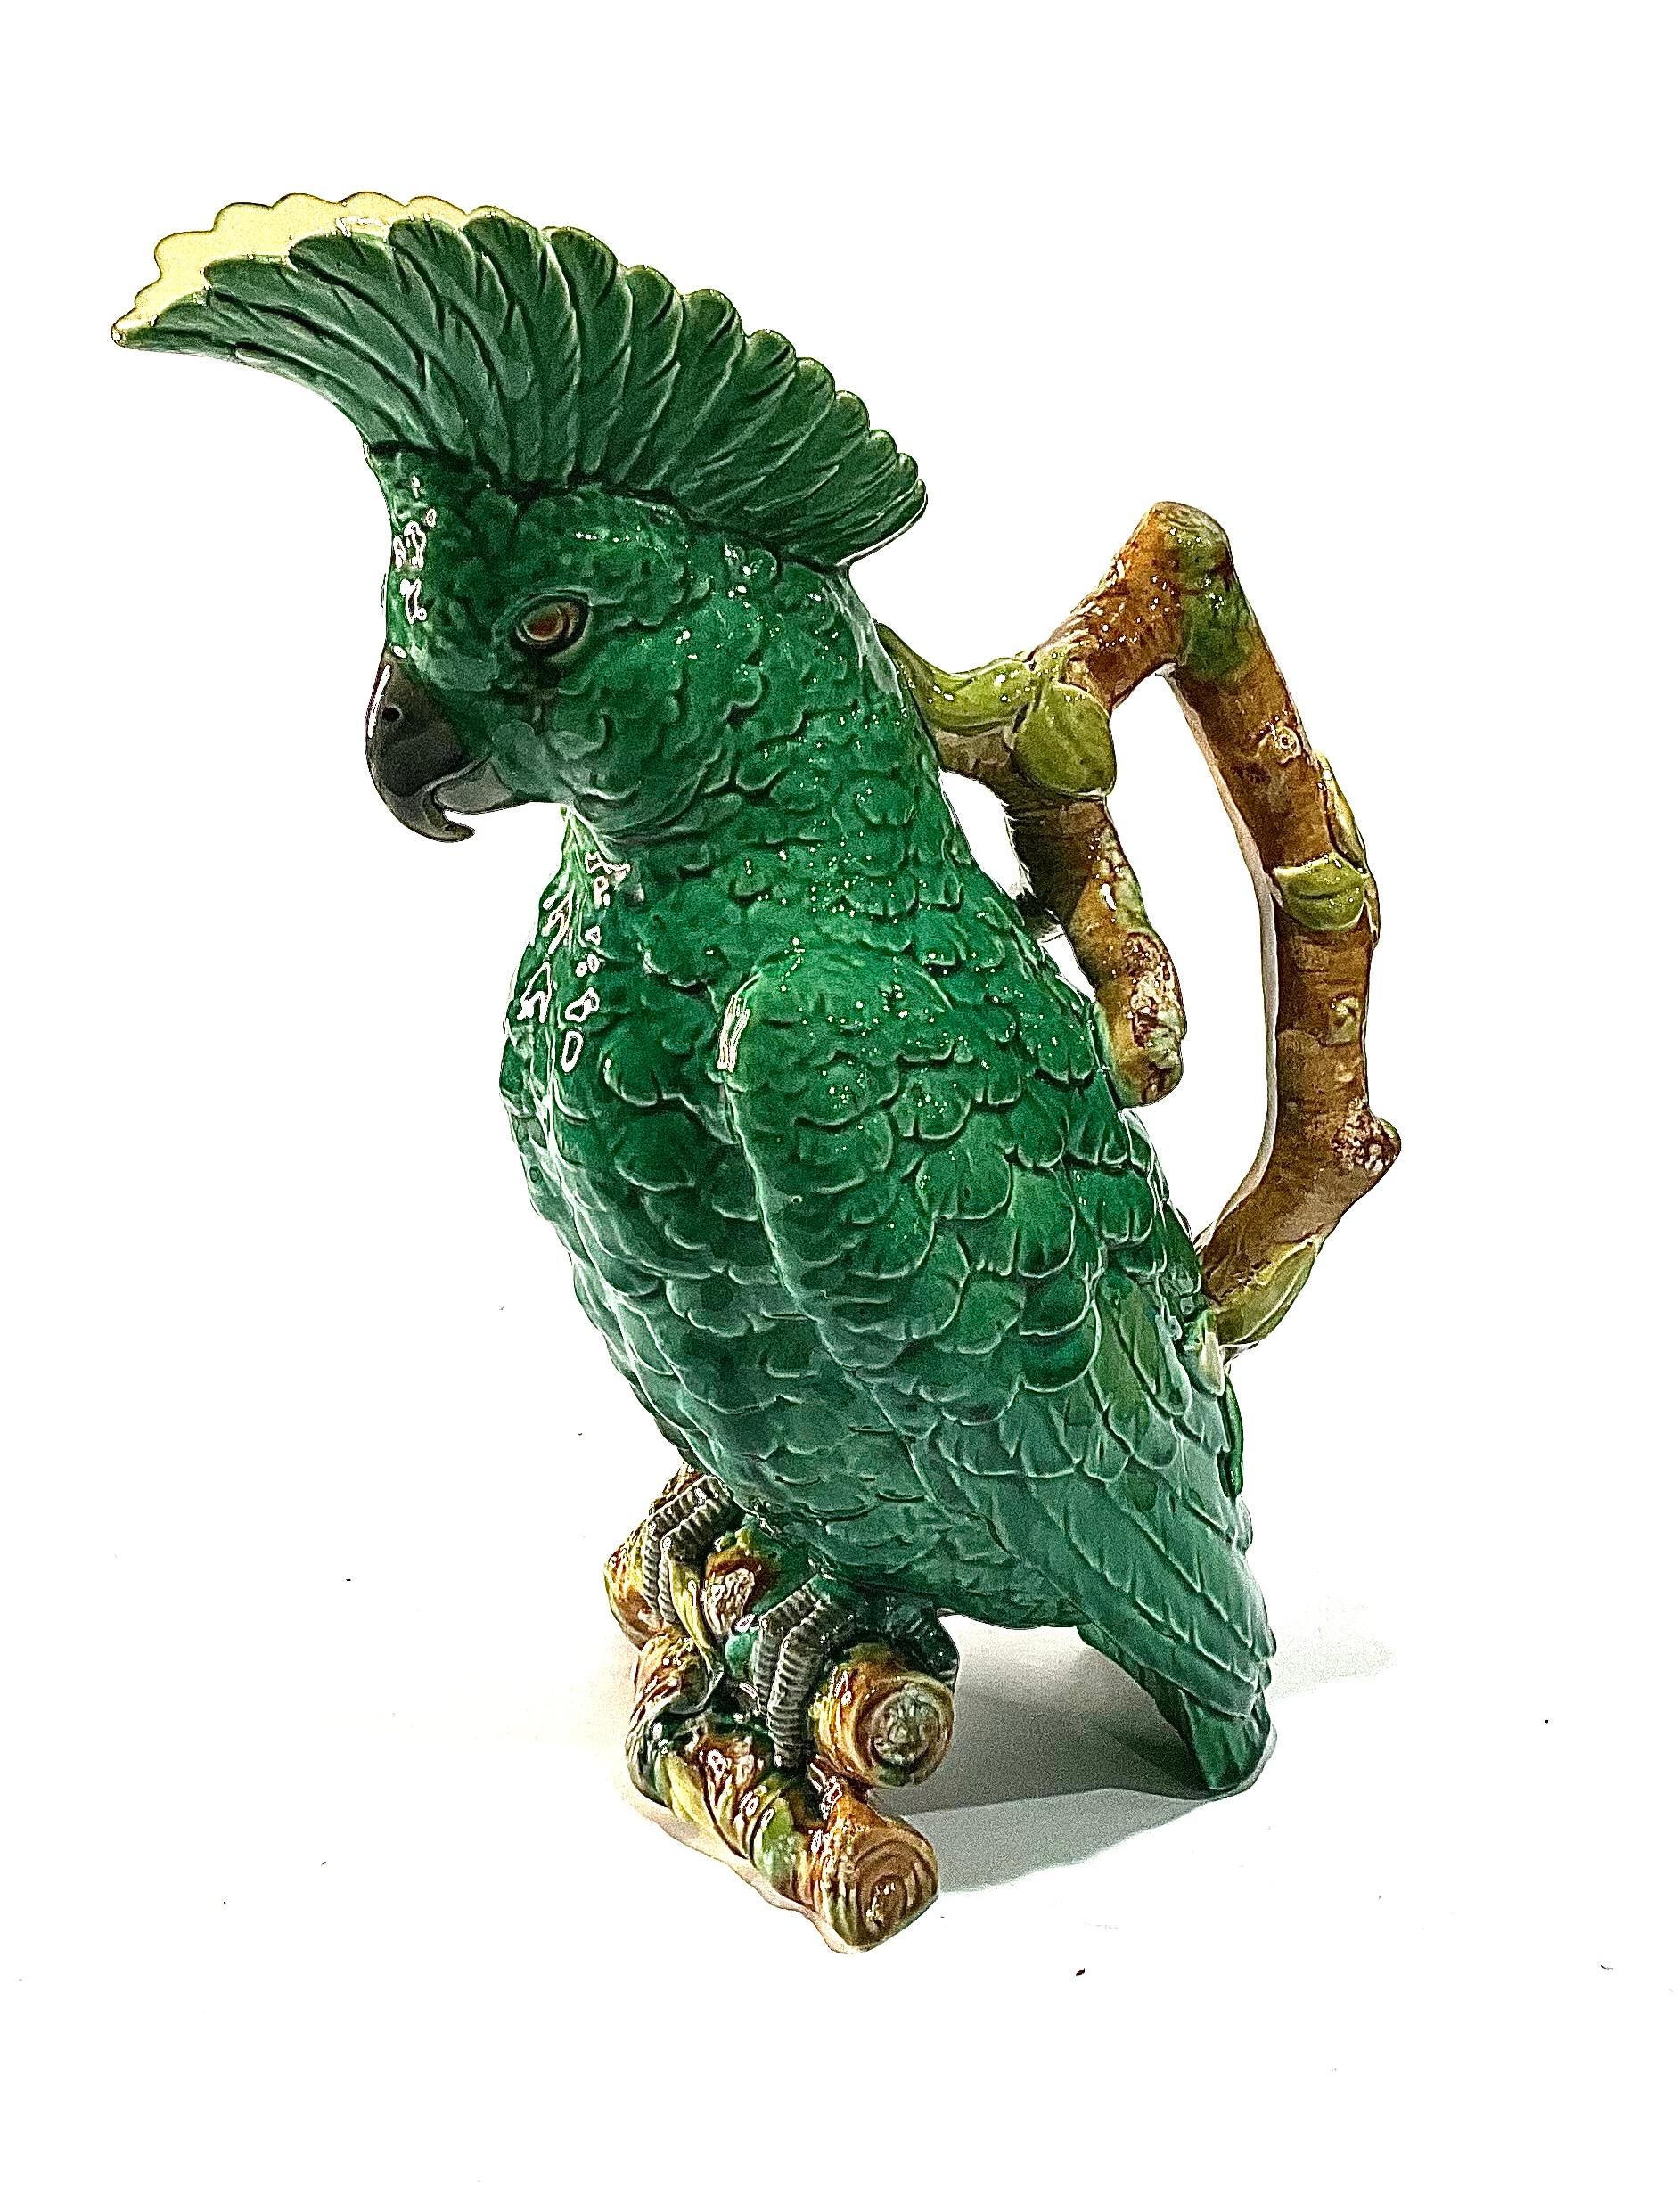 English William Brownfield Majolica Mottled Green Ground Cockatoo jug or pitcher 1890s